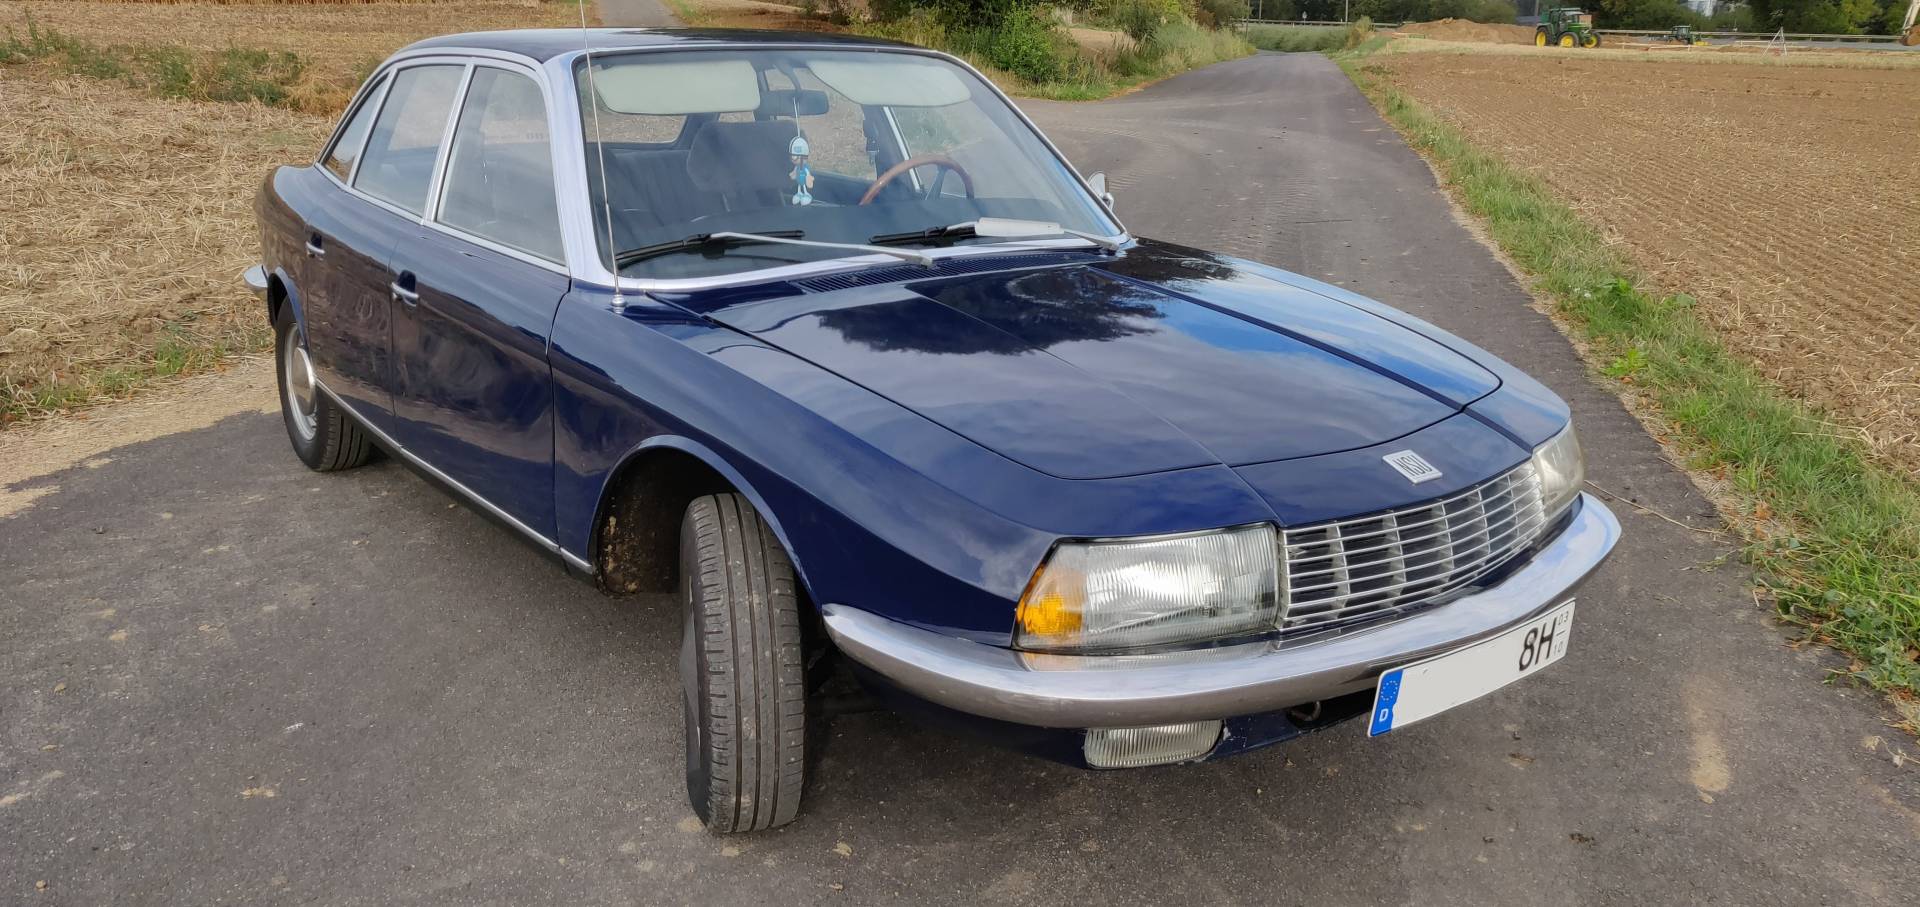 For Sale: NSU Ro 80 (1968) offered for GBP 11,344